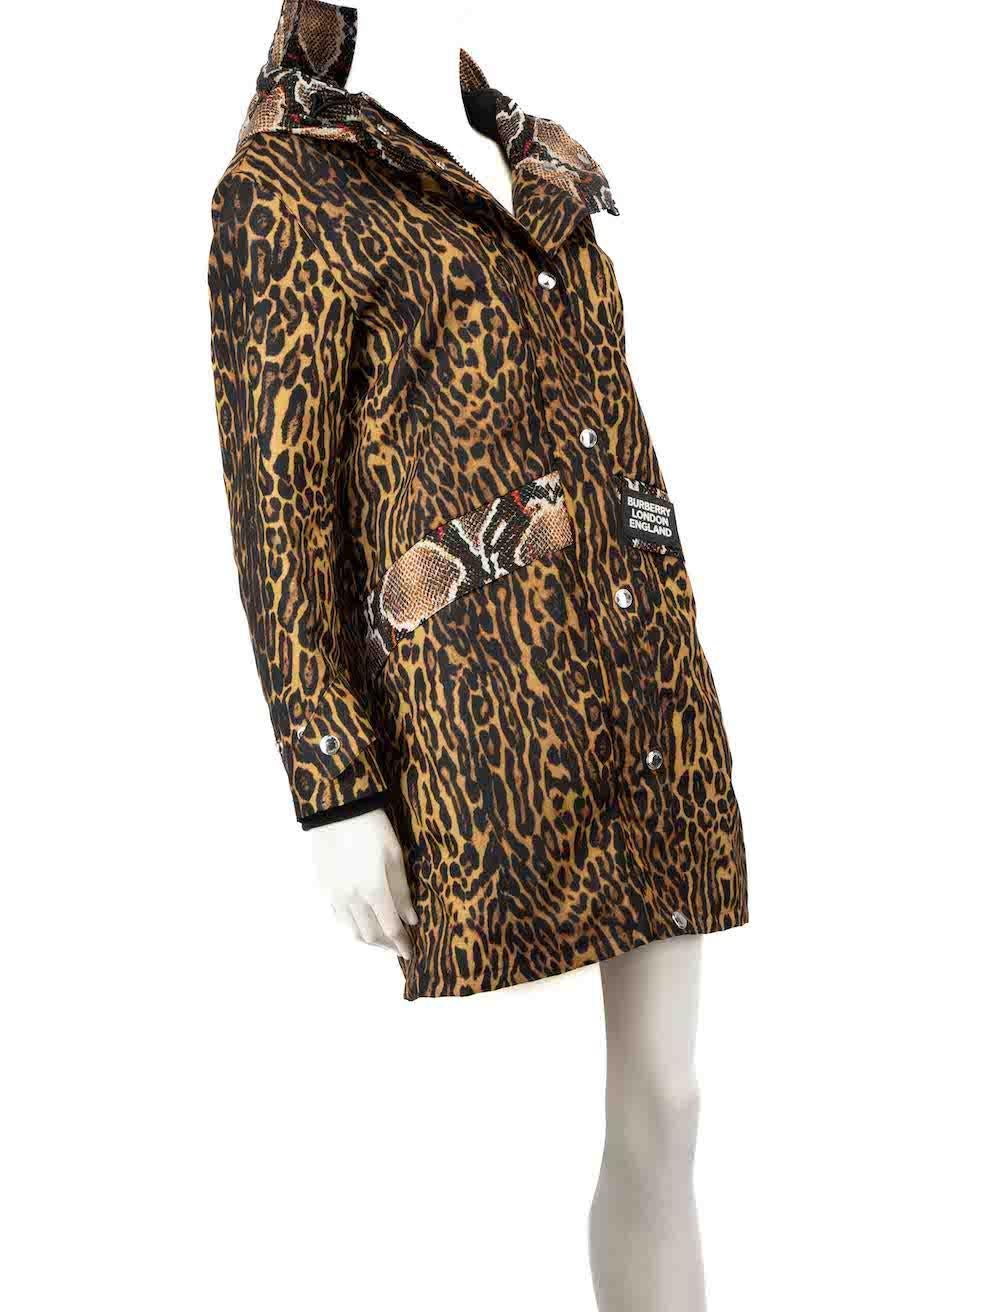 CONDITION is Very good. Hardly any visible wear to the parka is evident on this used Burberry designer resale item.
 
 
 
 Details
 
 
 Brown
 
 Synthetic
 
 Parka coat
 
 Leopard print body
 
 Snake print hood and trim
 
 Zip and snap button